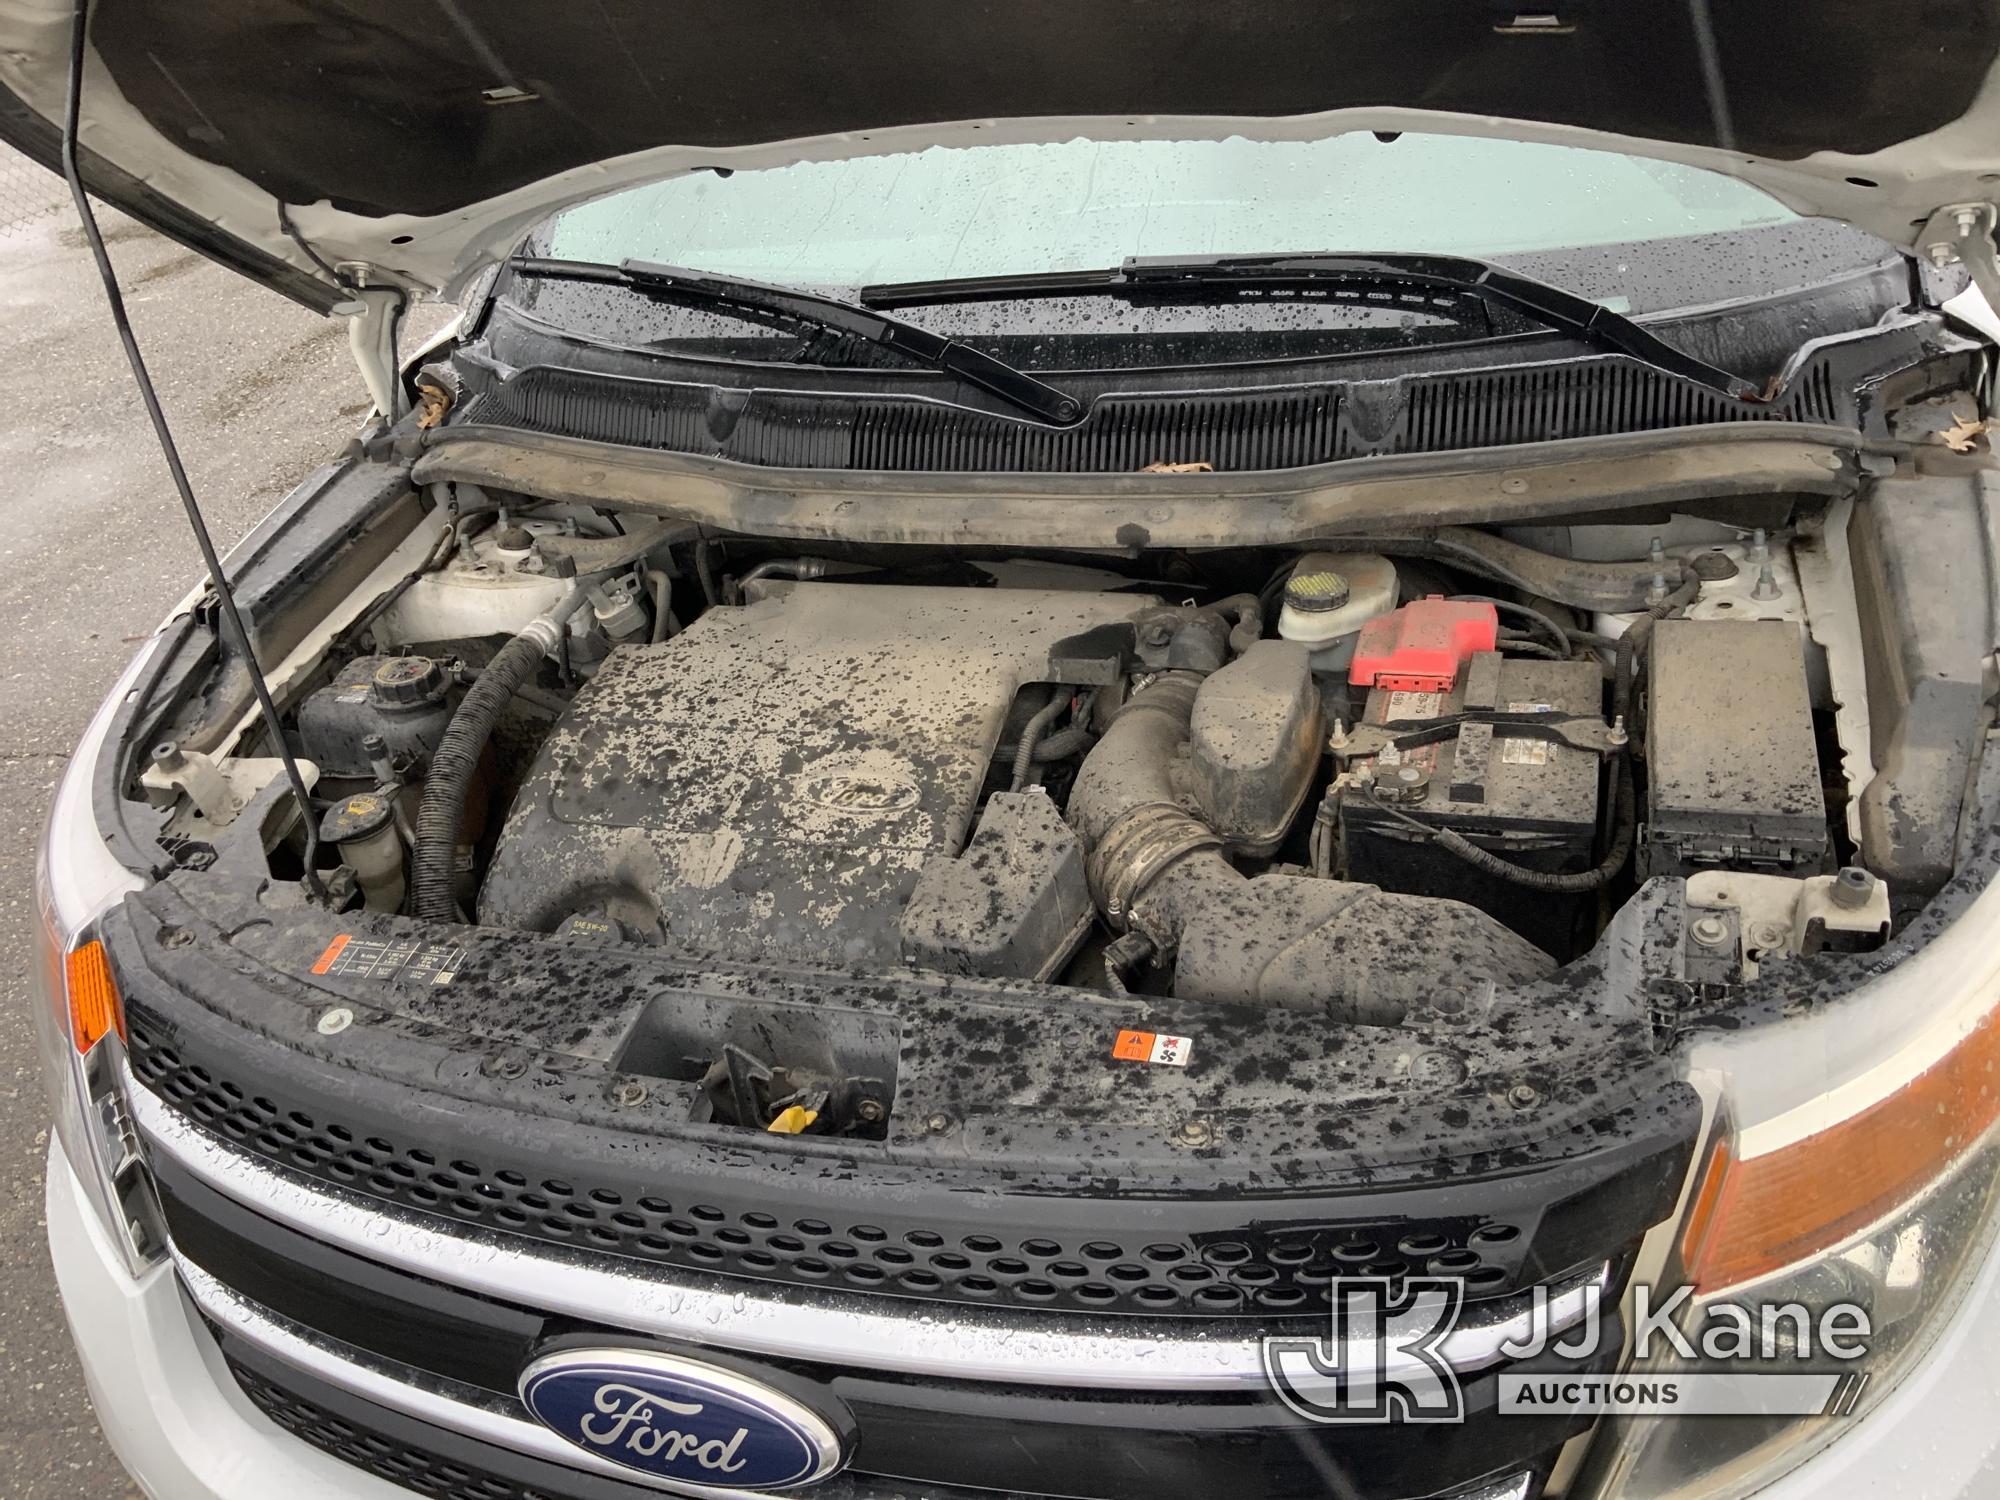 (Dixon, CA) 2014 Ford Explorer 4x4 Sport Utility Vehicle Runs & Moves, Recall Incomplete With Remedy